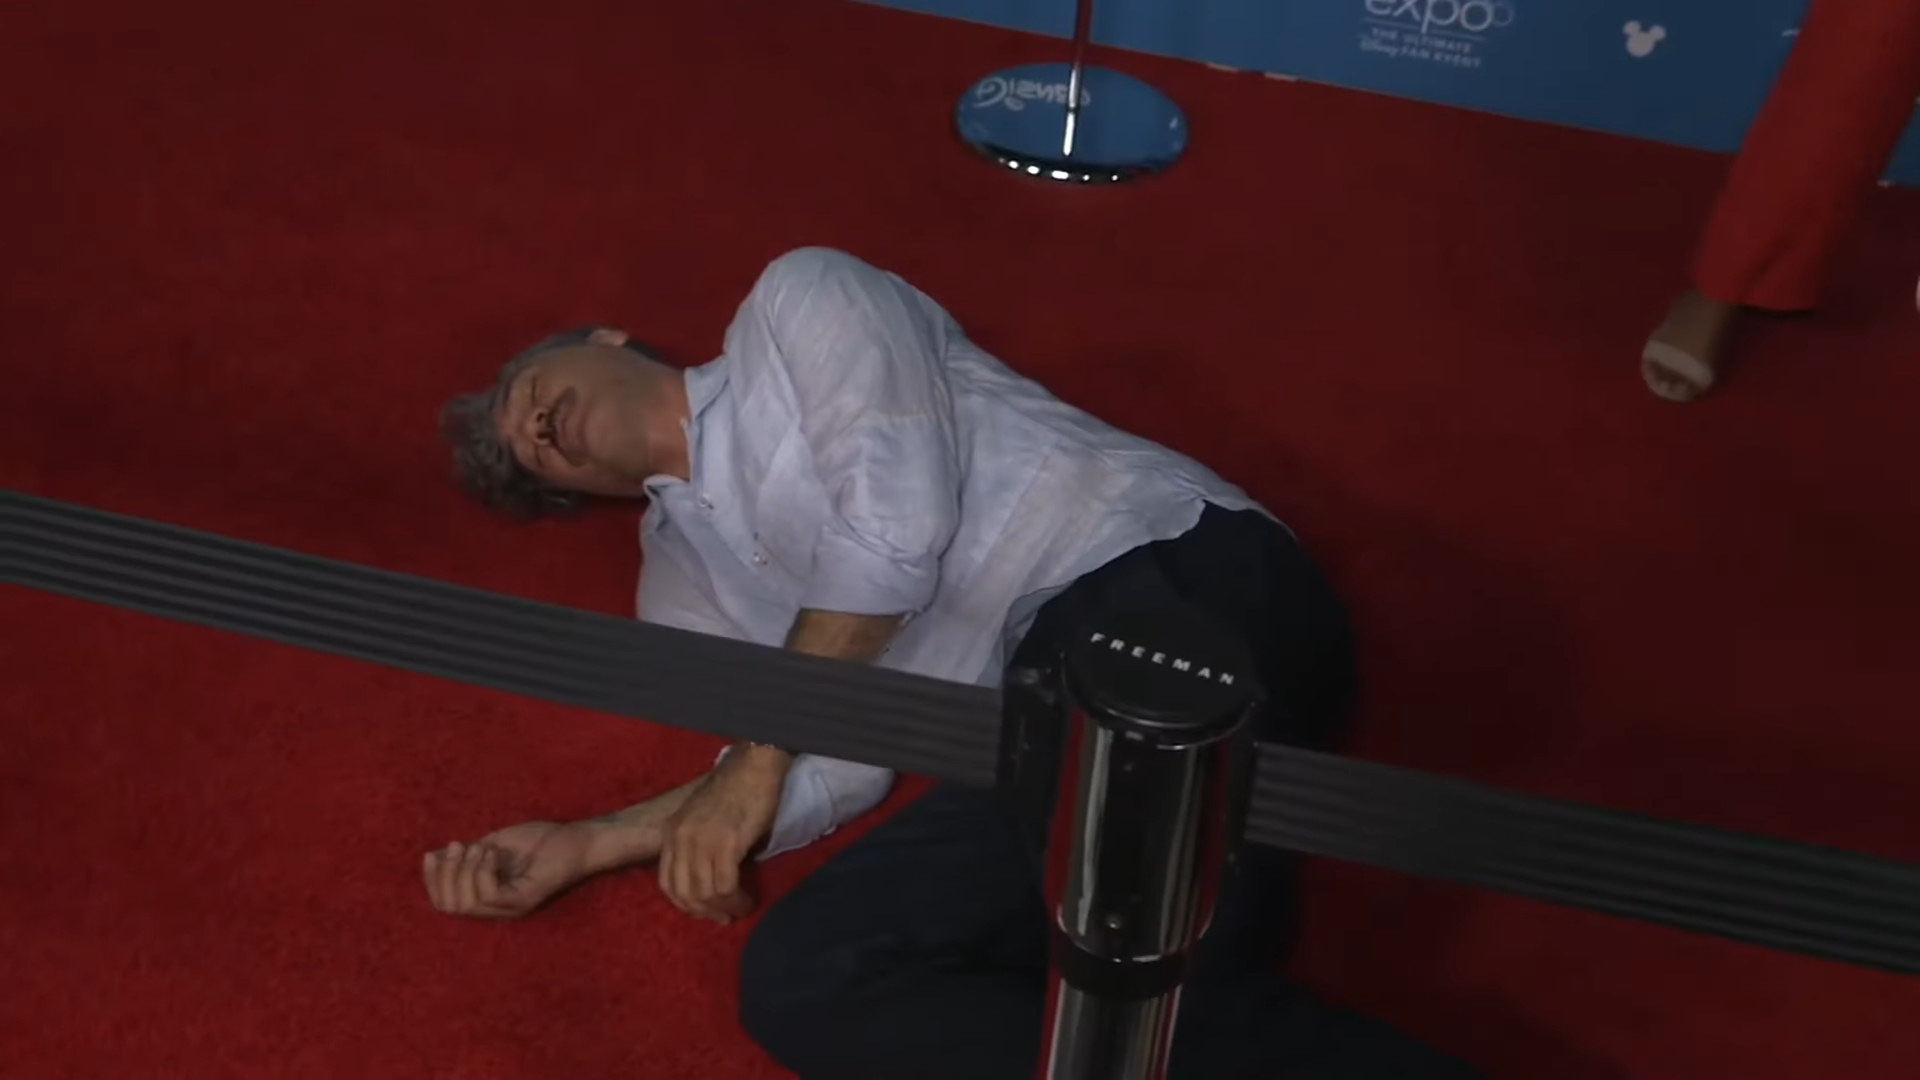 Taika pretending to be dead on the red carpet